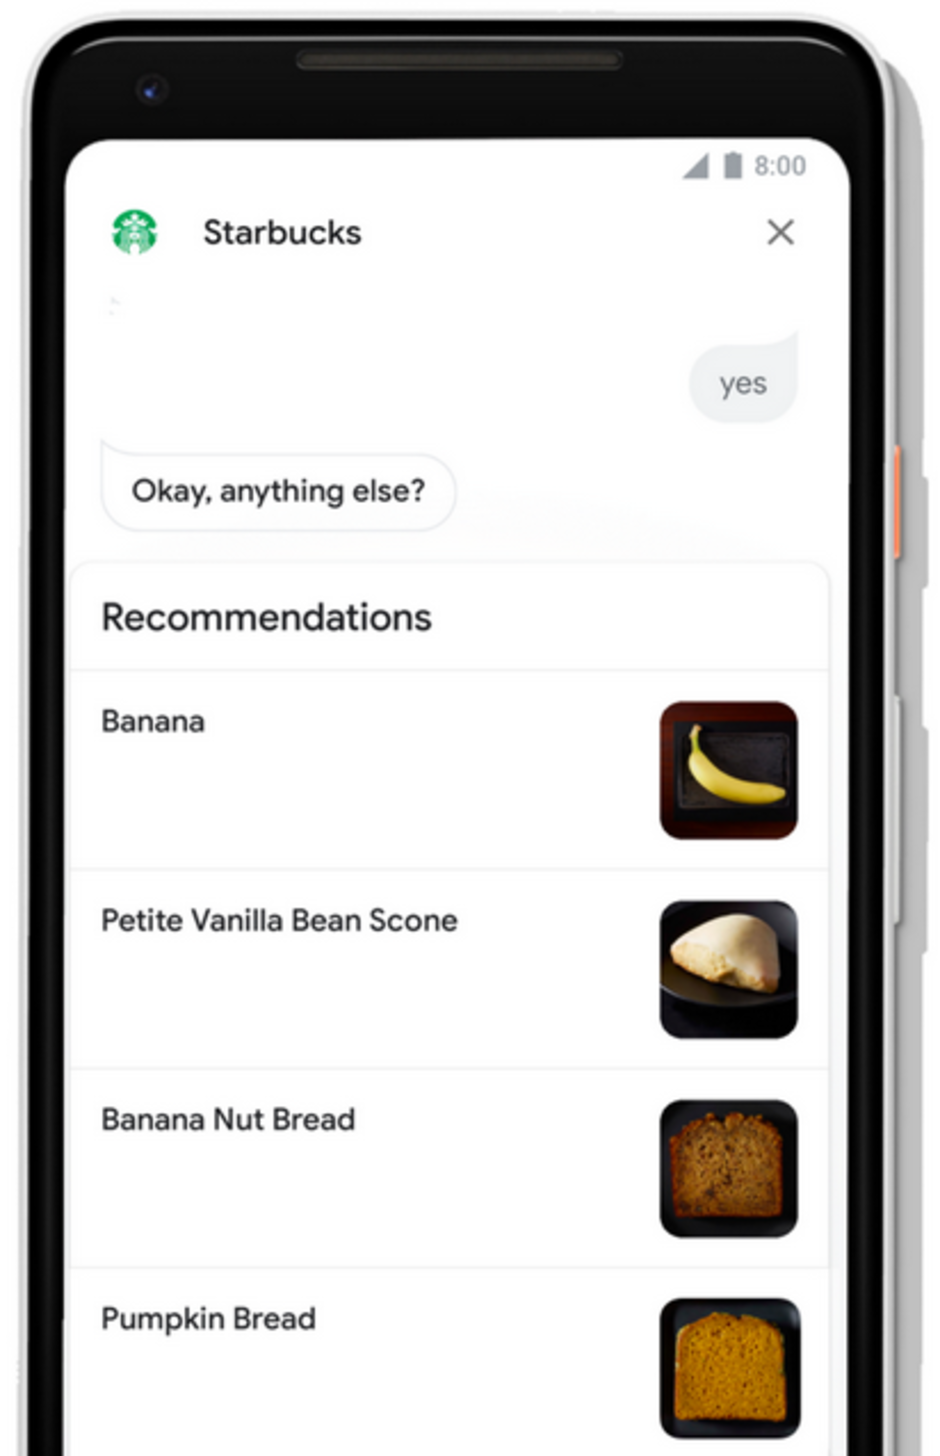 With the redesign to Google Assistant, larger photos show recommended menu items at Starbuck - Google Assistant redesign adds larger visual content, more interactive controls